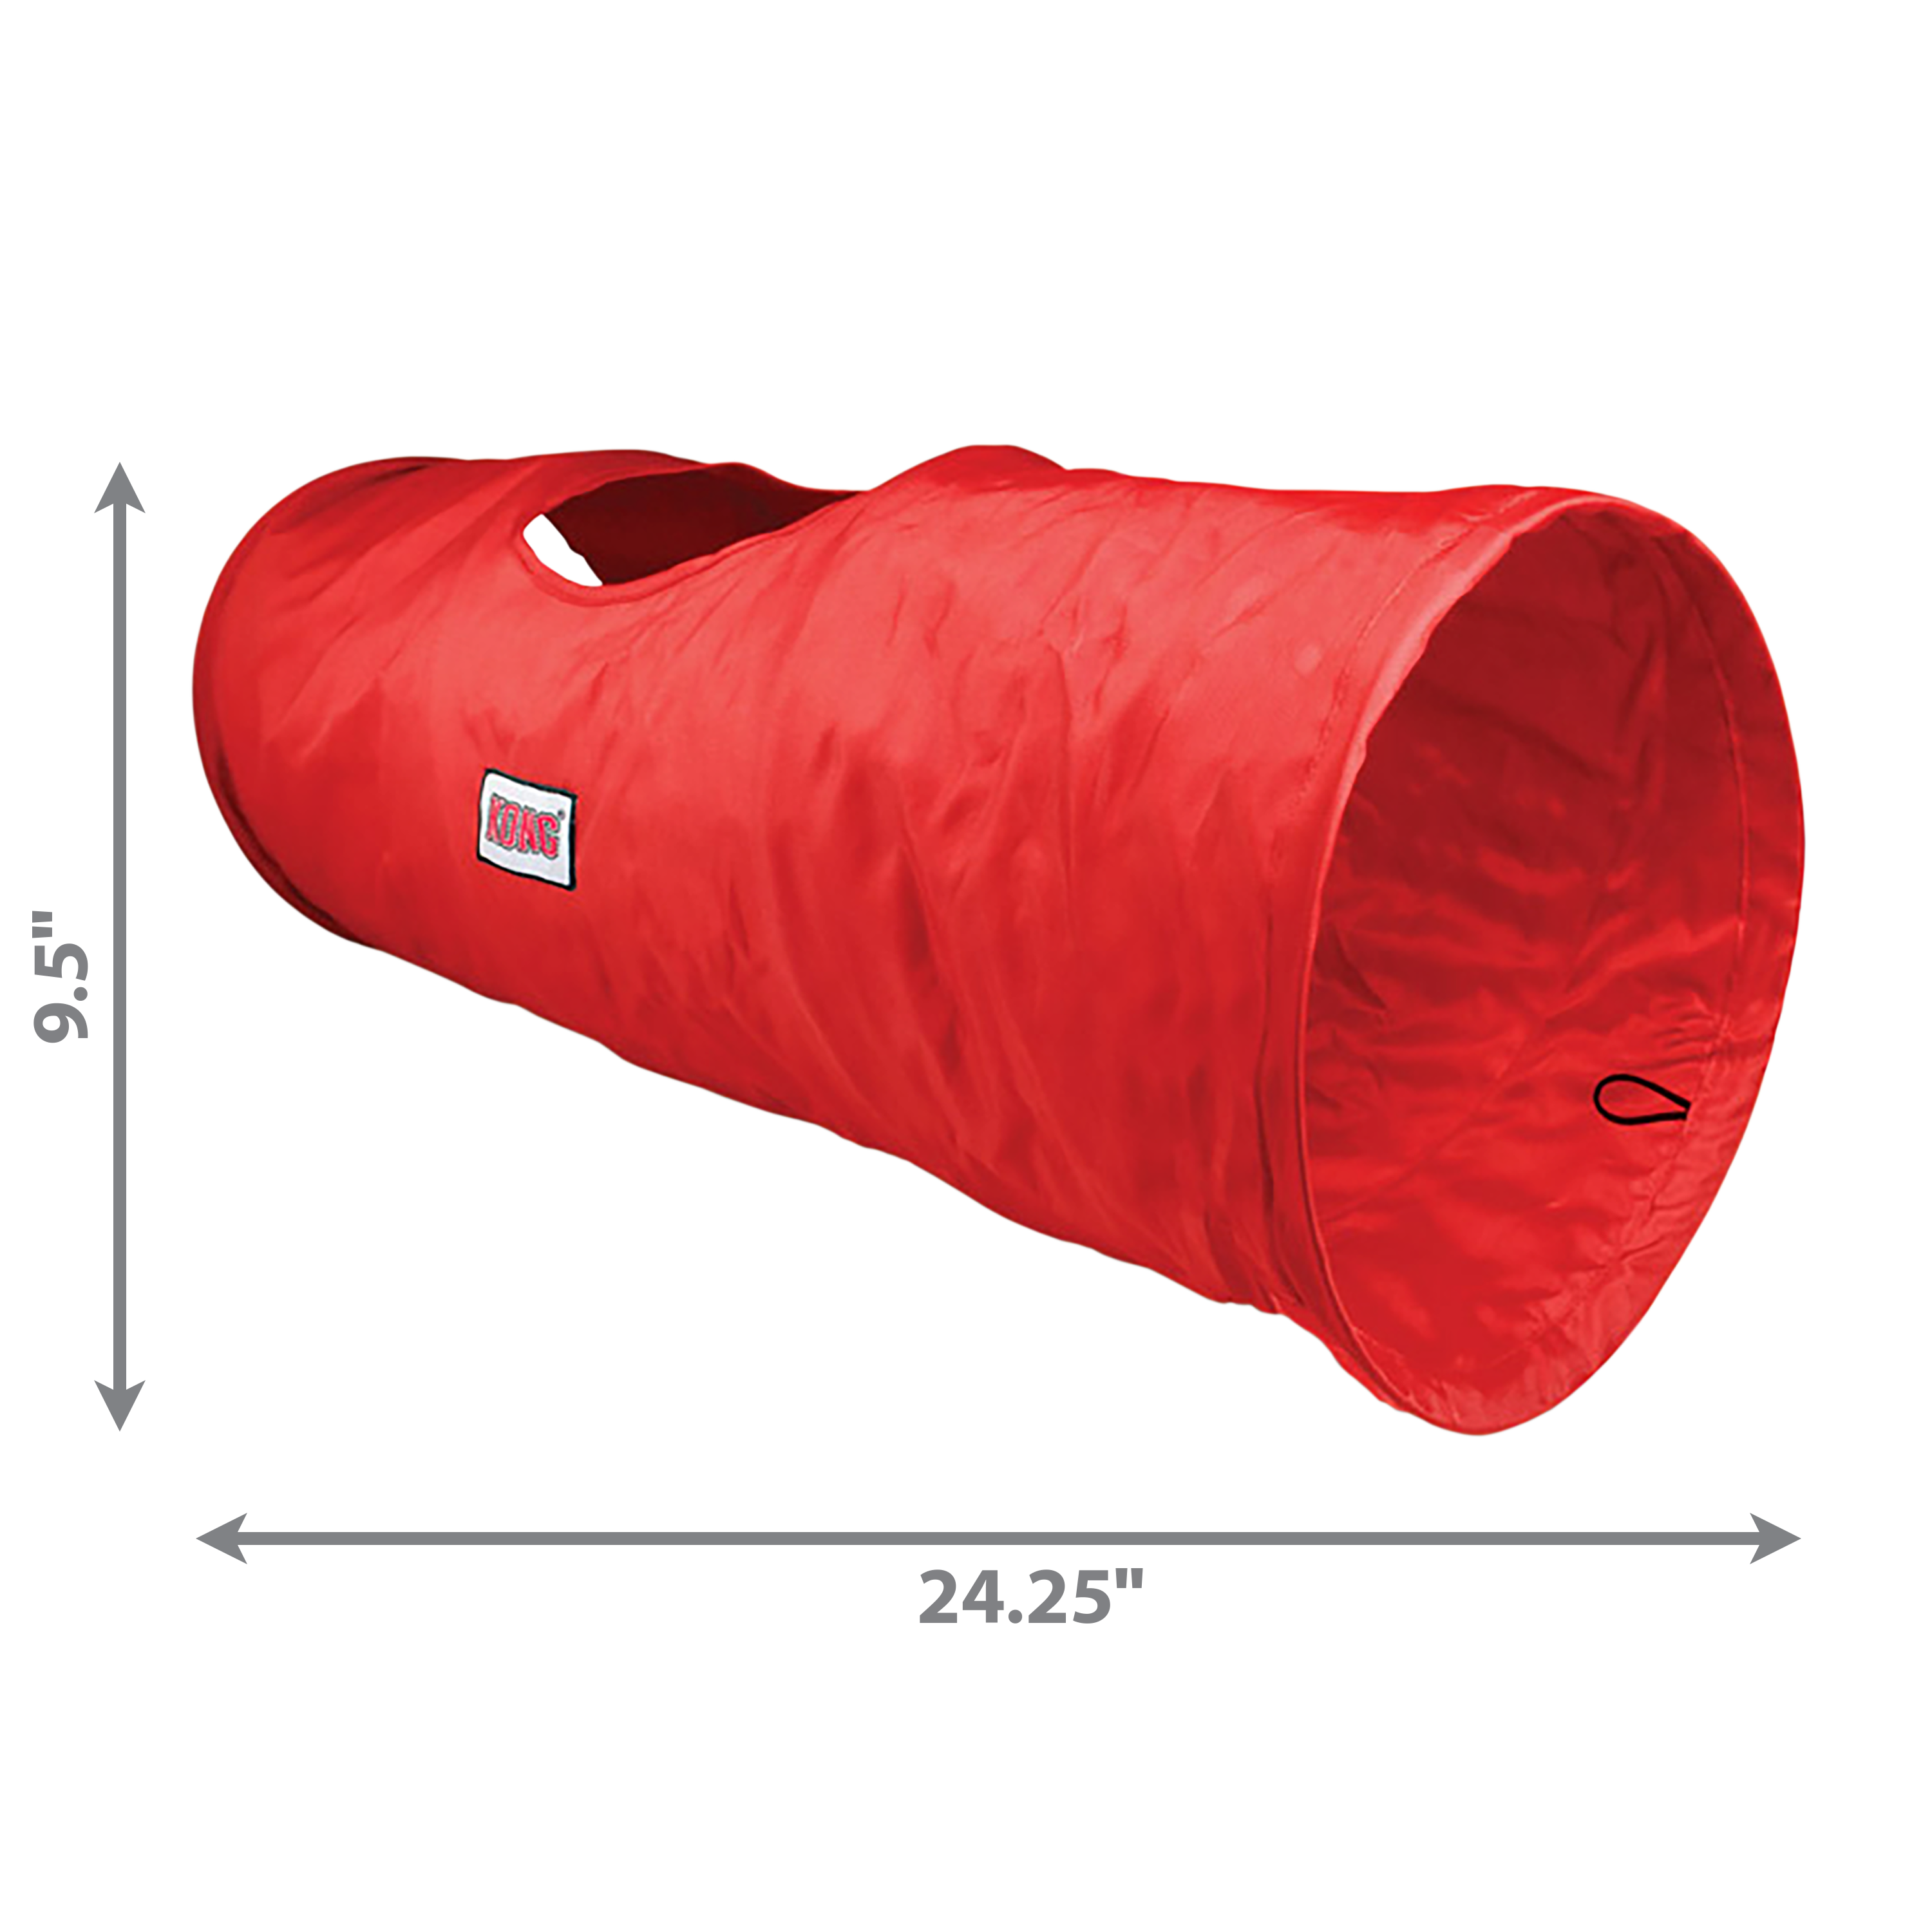 Play Spaces Tunnel Red product image